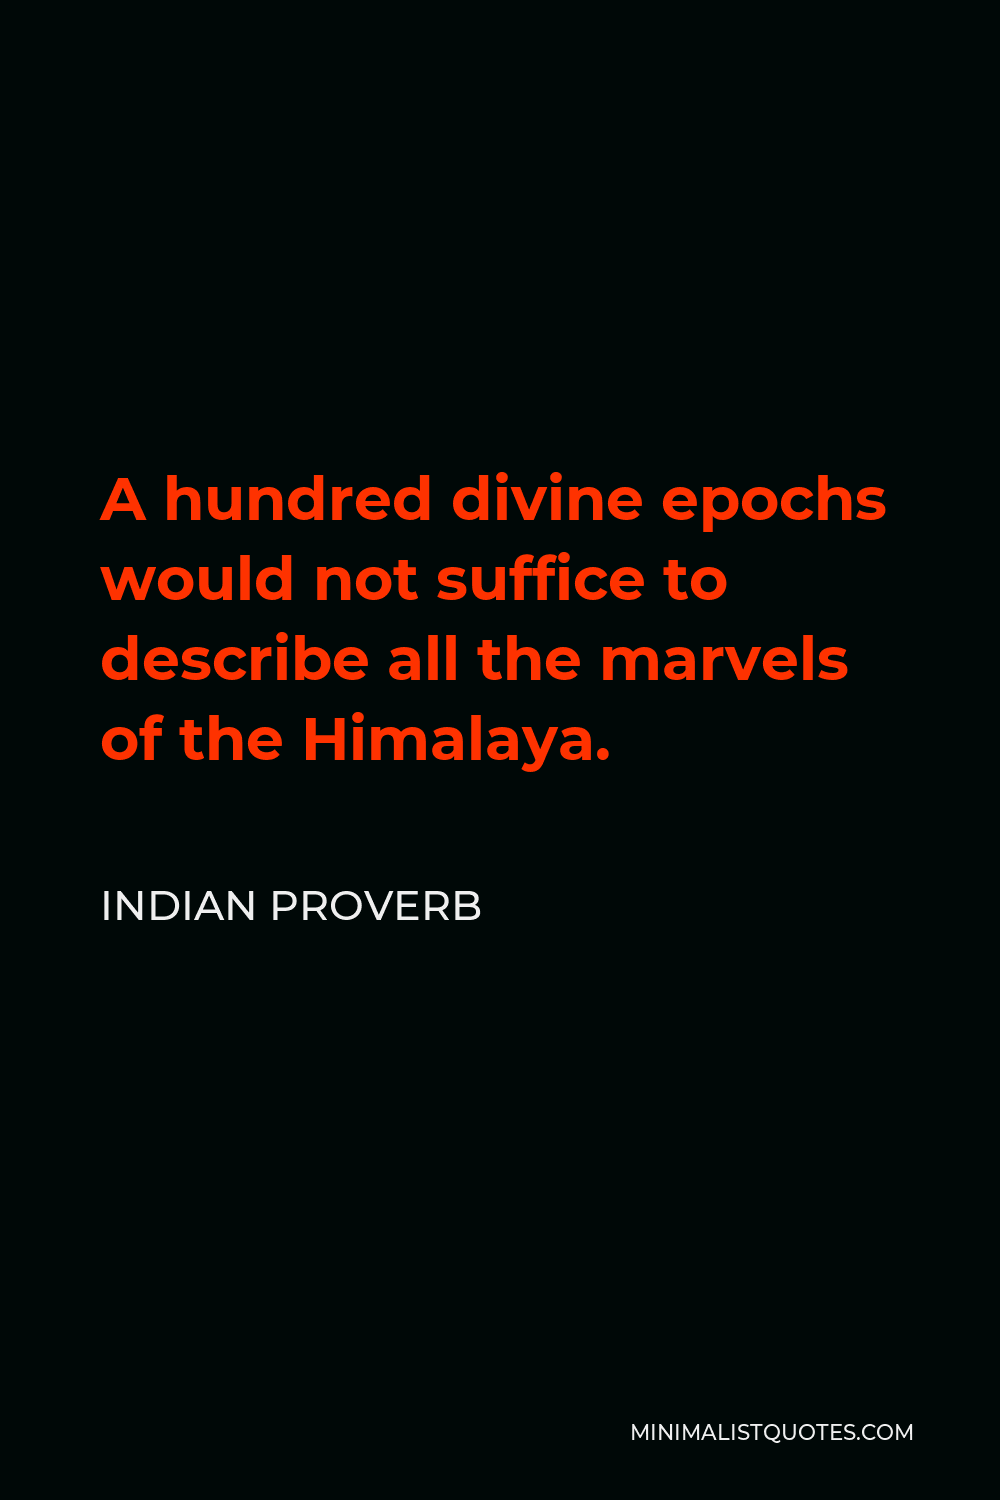 Indian Proverb Quote - A hundred divine epochs would not suffice to describe all the marvels of the Himalaya.